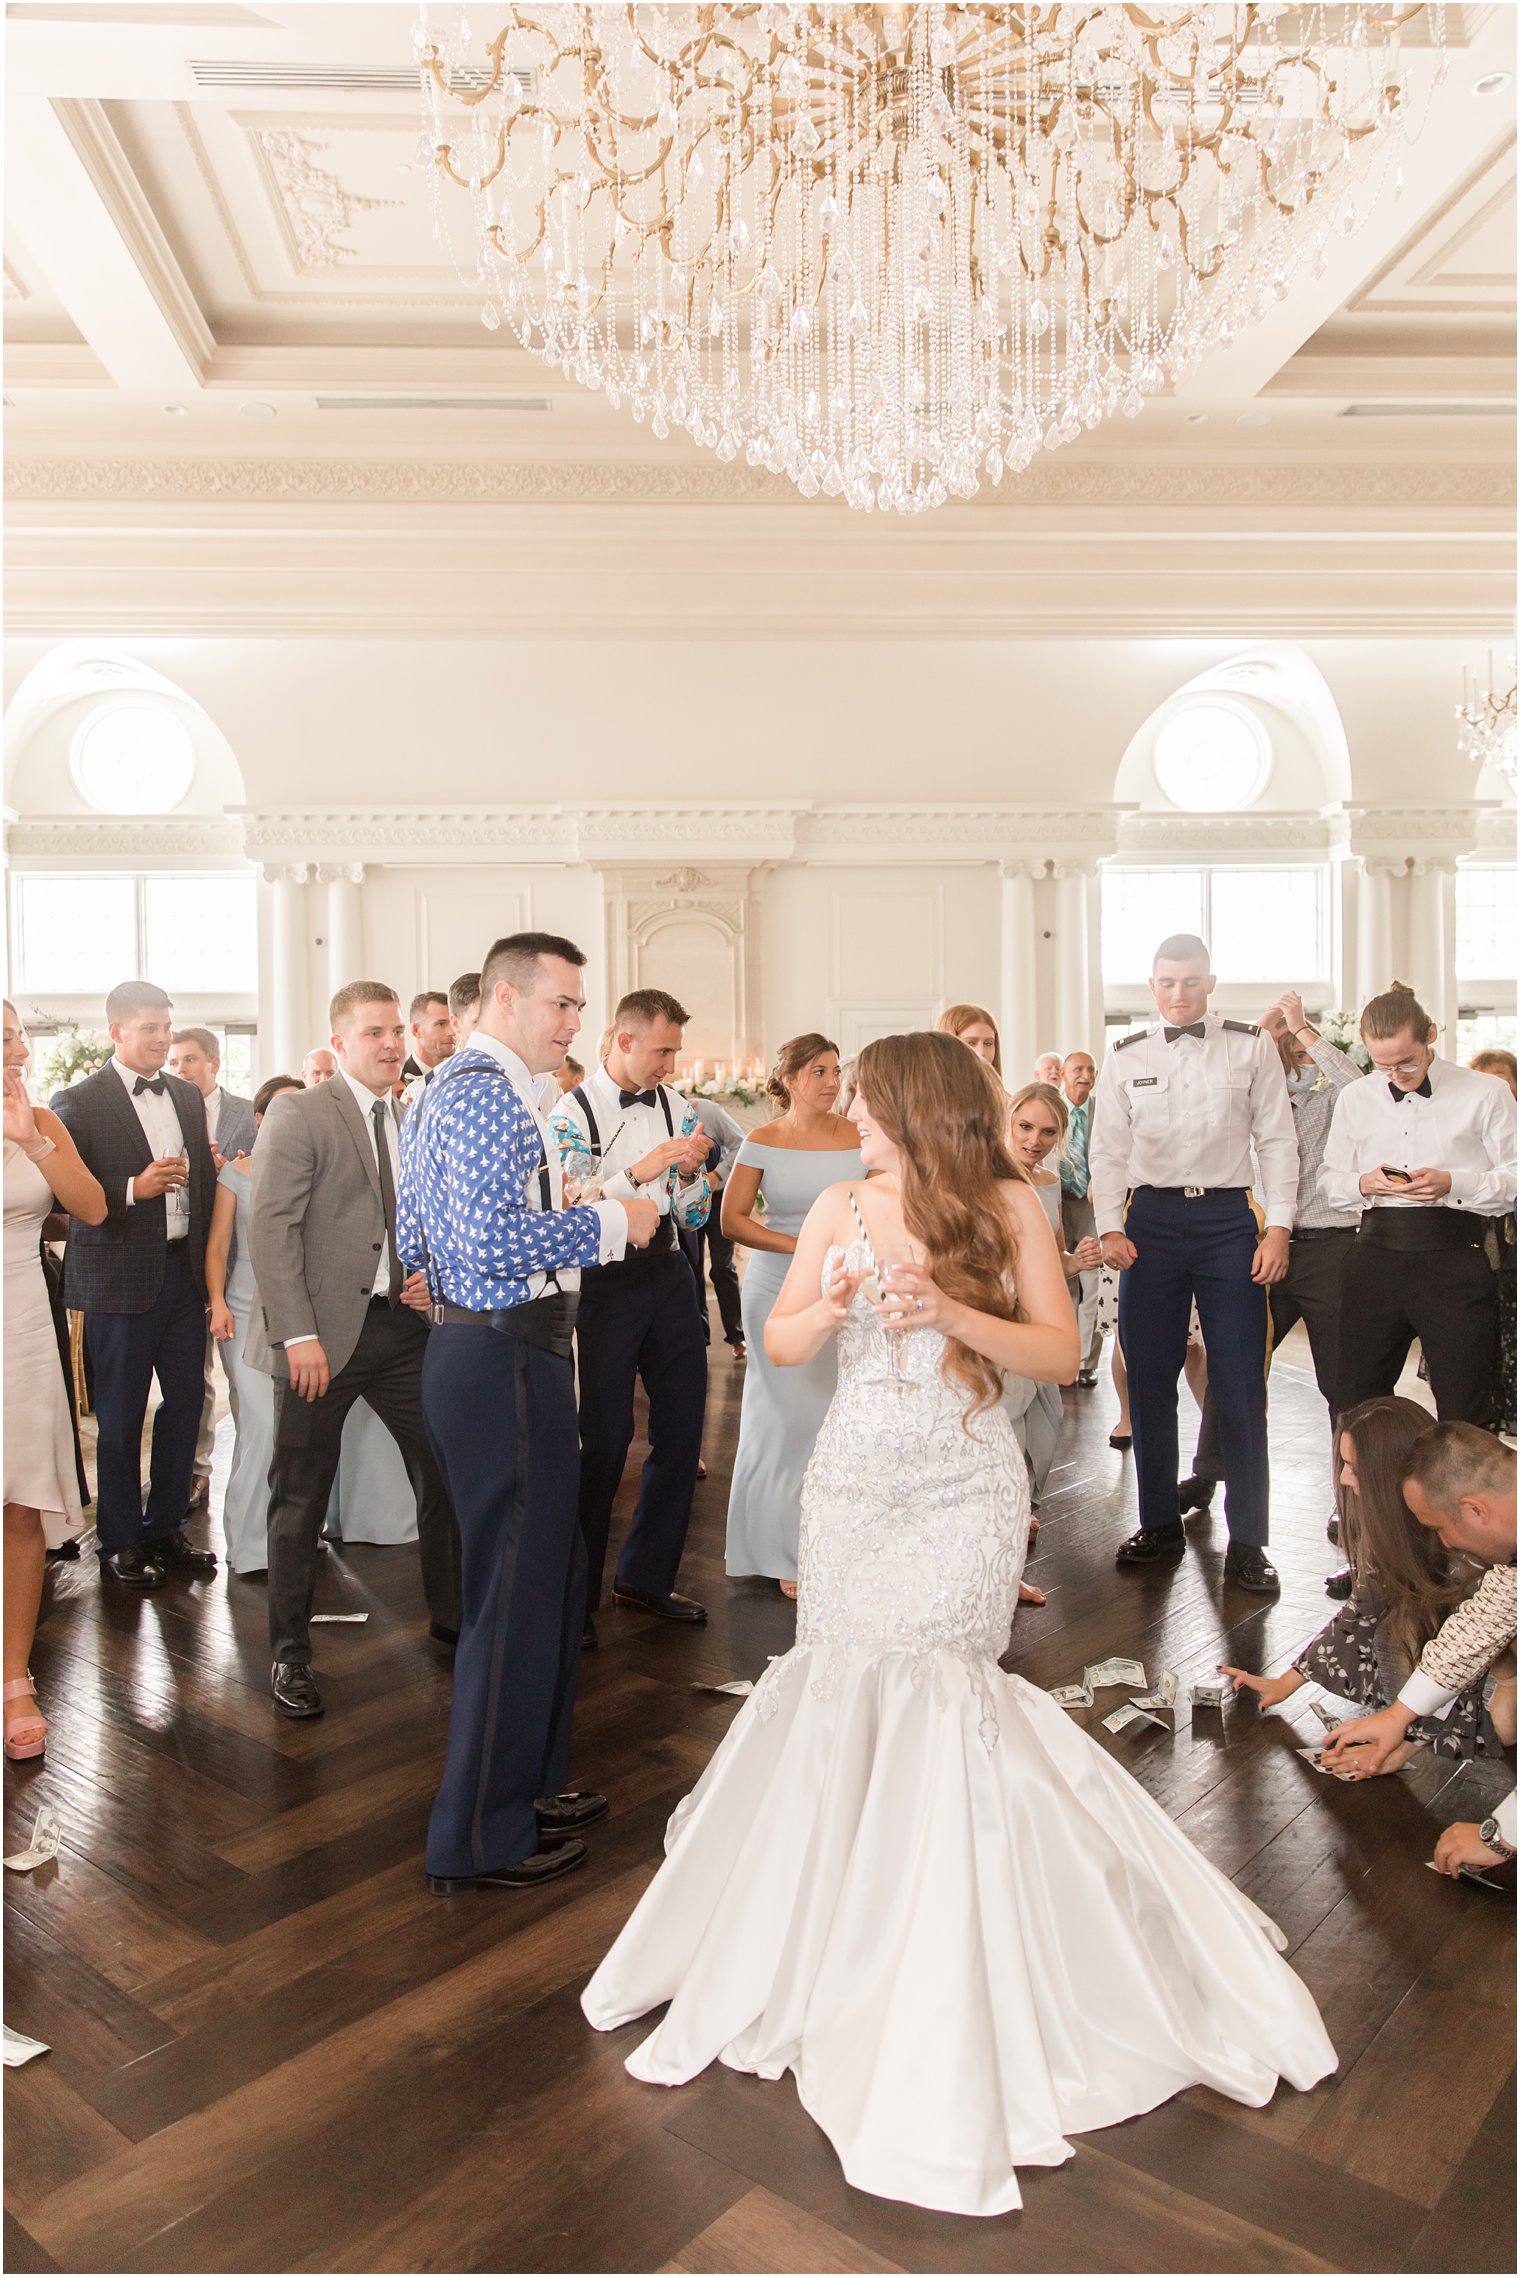 newlyweds dance with guests during East Brunswick NJ wedding reception